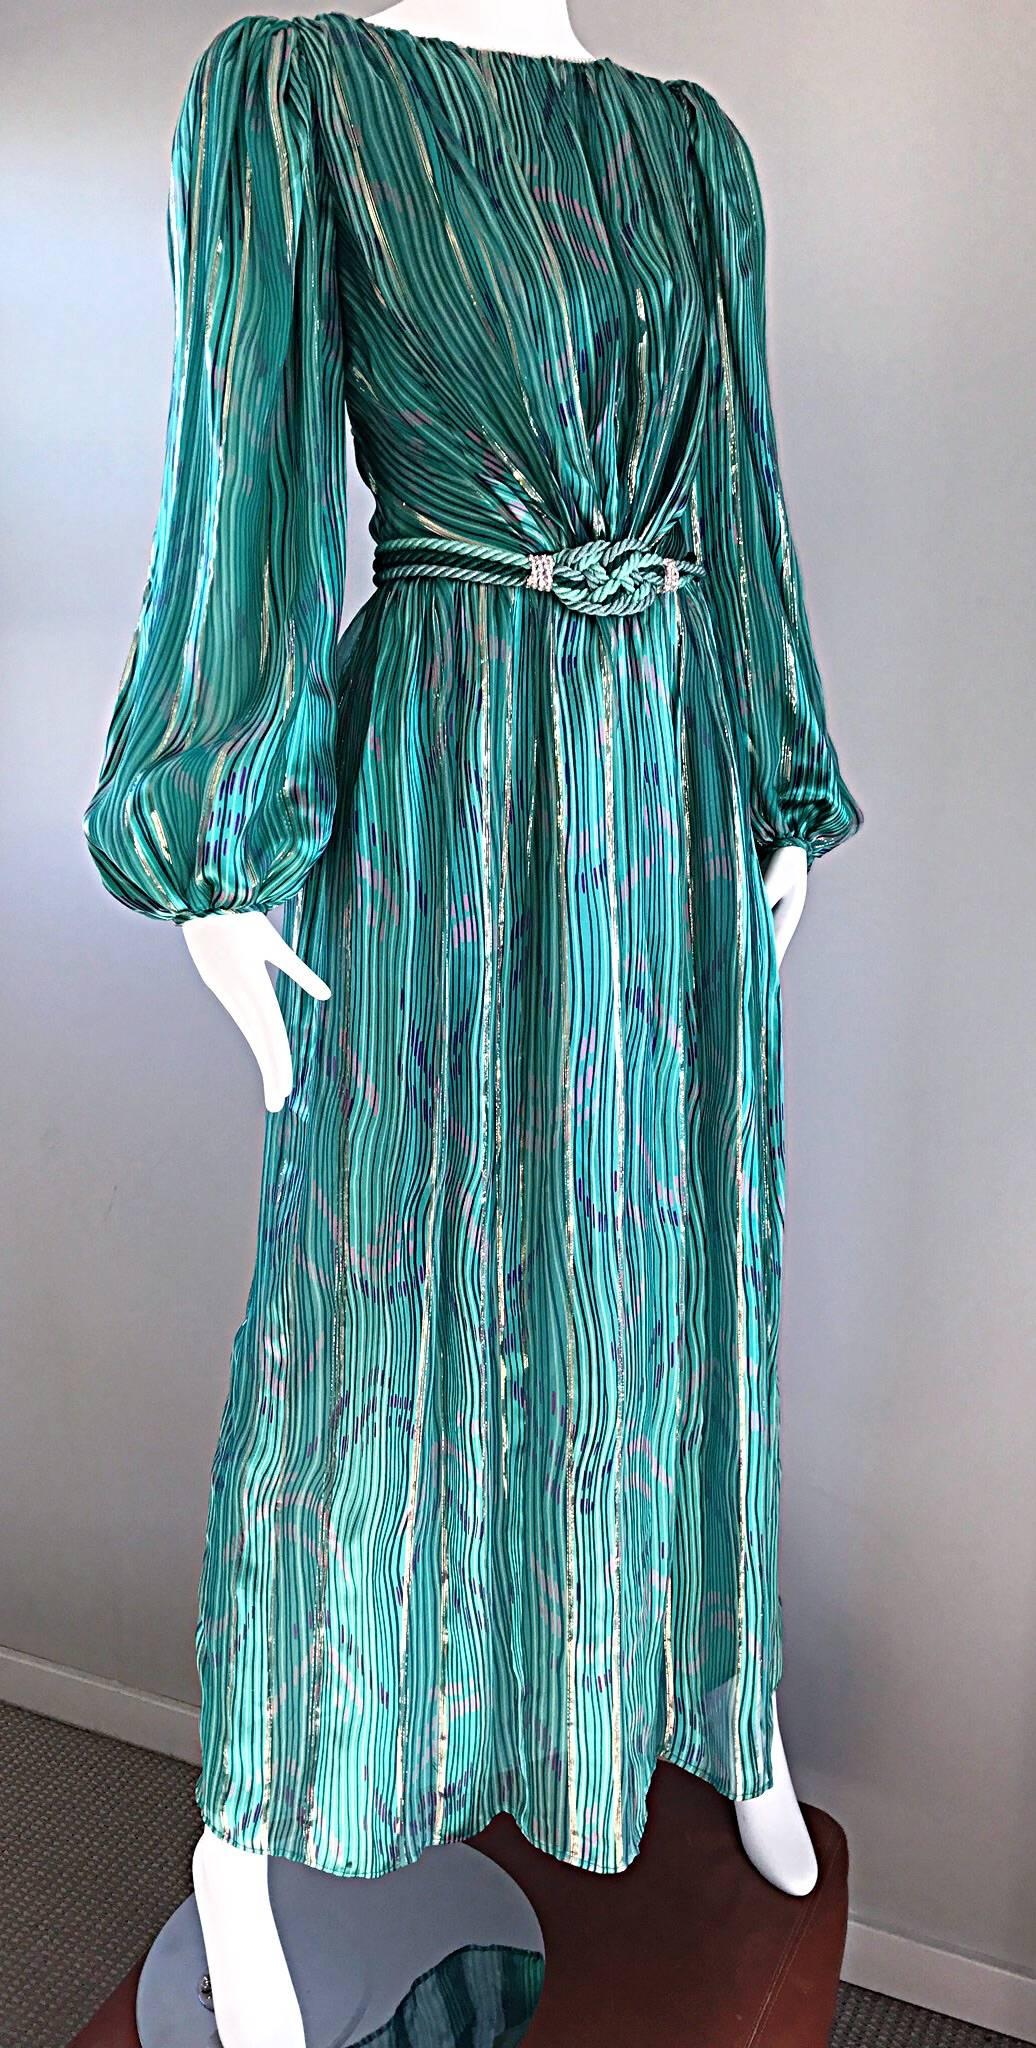 Gorgeous vintage late 70s DIANE DICKINSON silk gown! Features vibrant hues of greens, pink, purple, blue and gold prints throughout. Full Flowy bishop sleeves, with emerald green jeweled button closures at the cuffs. Detachable corded green silk